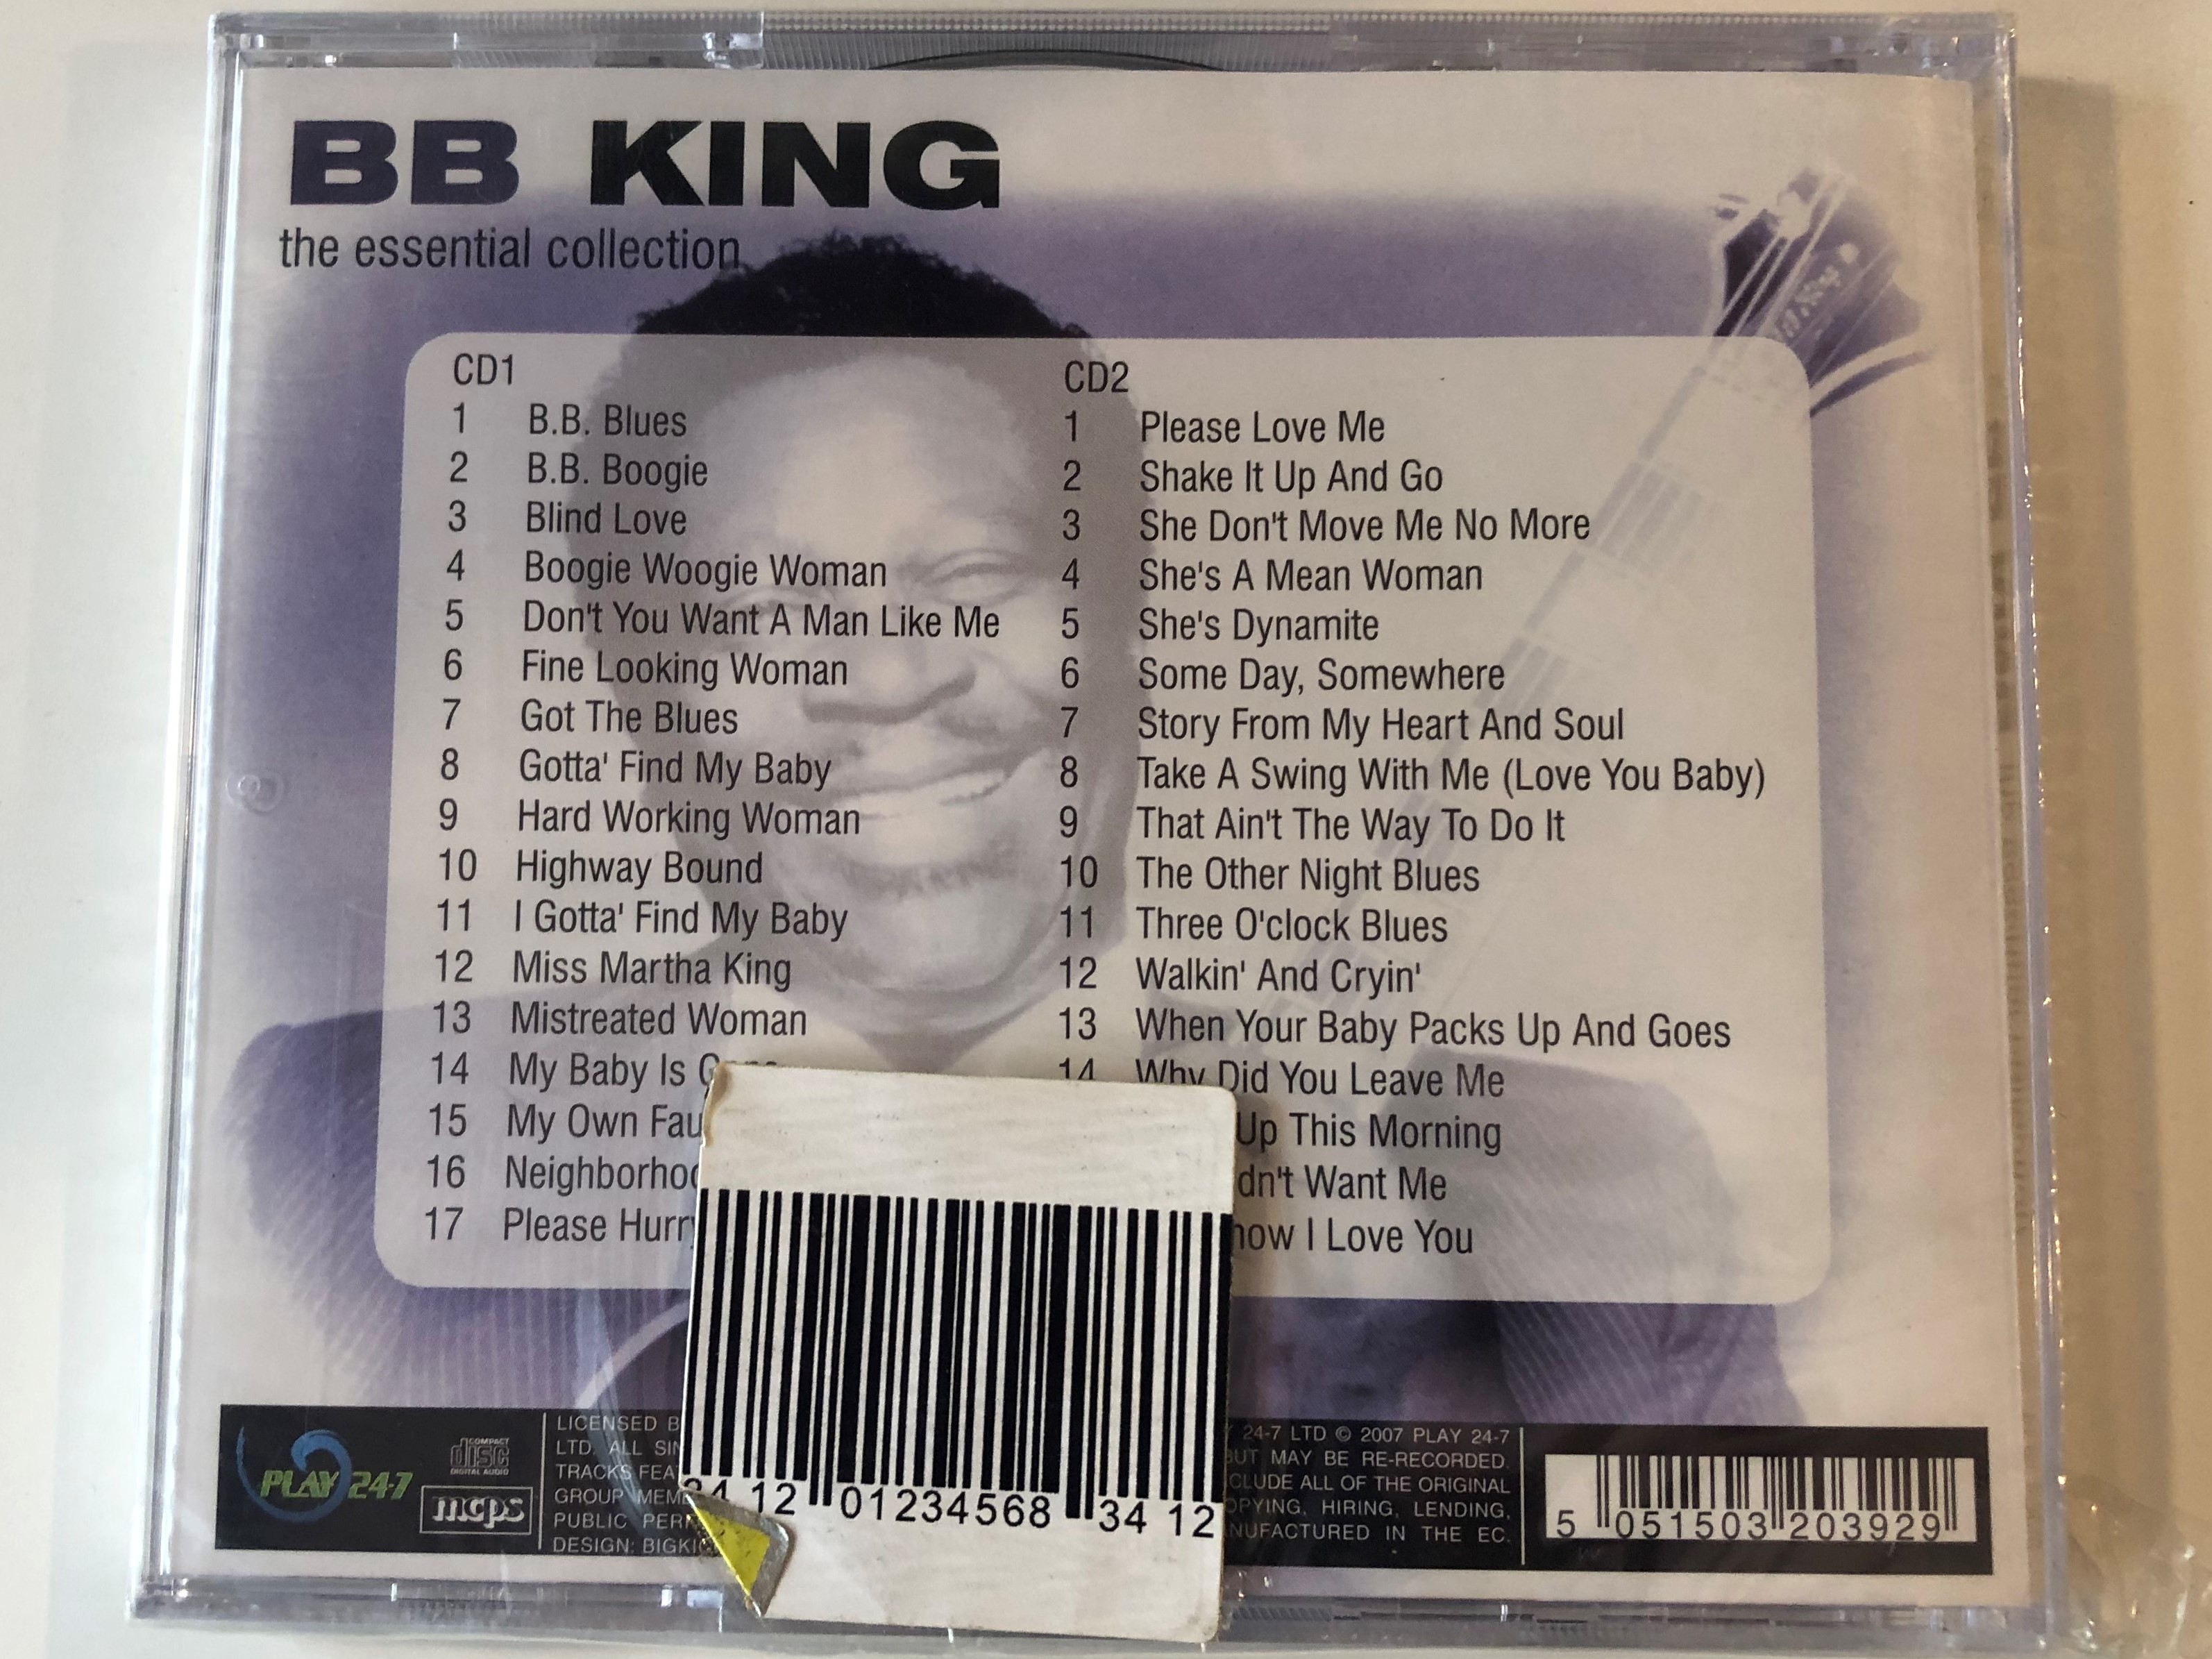 bb-king-the-essential-collection-34-classic-tracks-on-2cds-play-24-7-2x-audio-cd-2007-play-2-039-2-.jpg